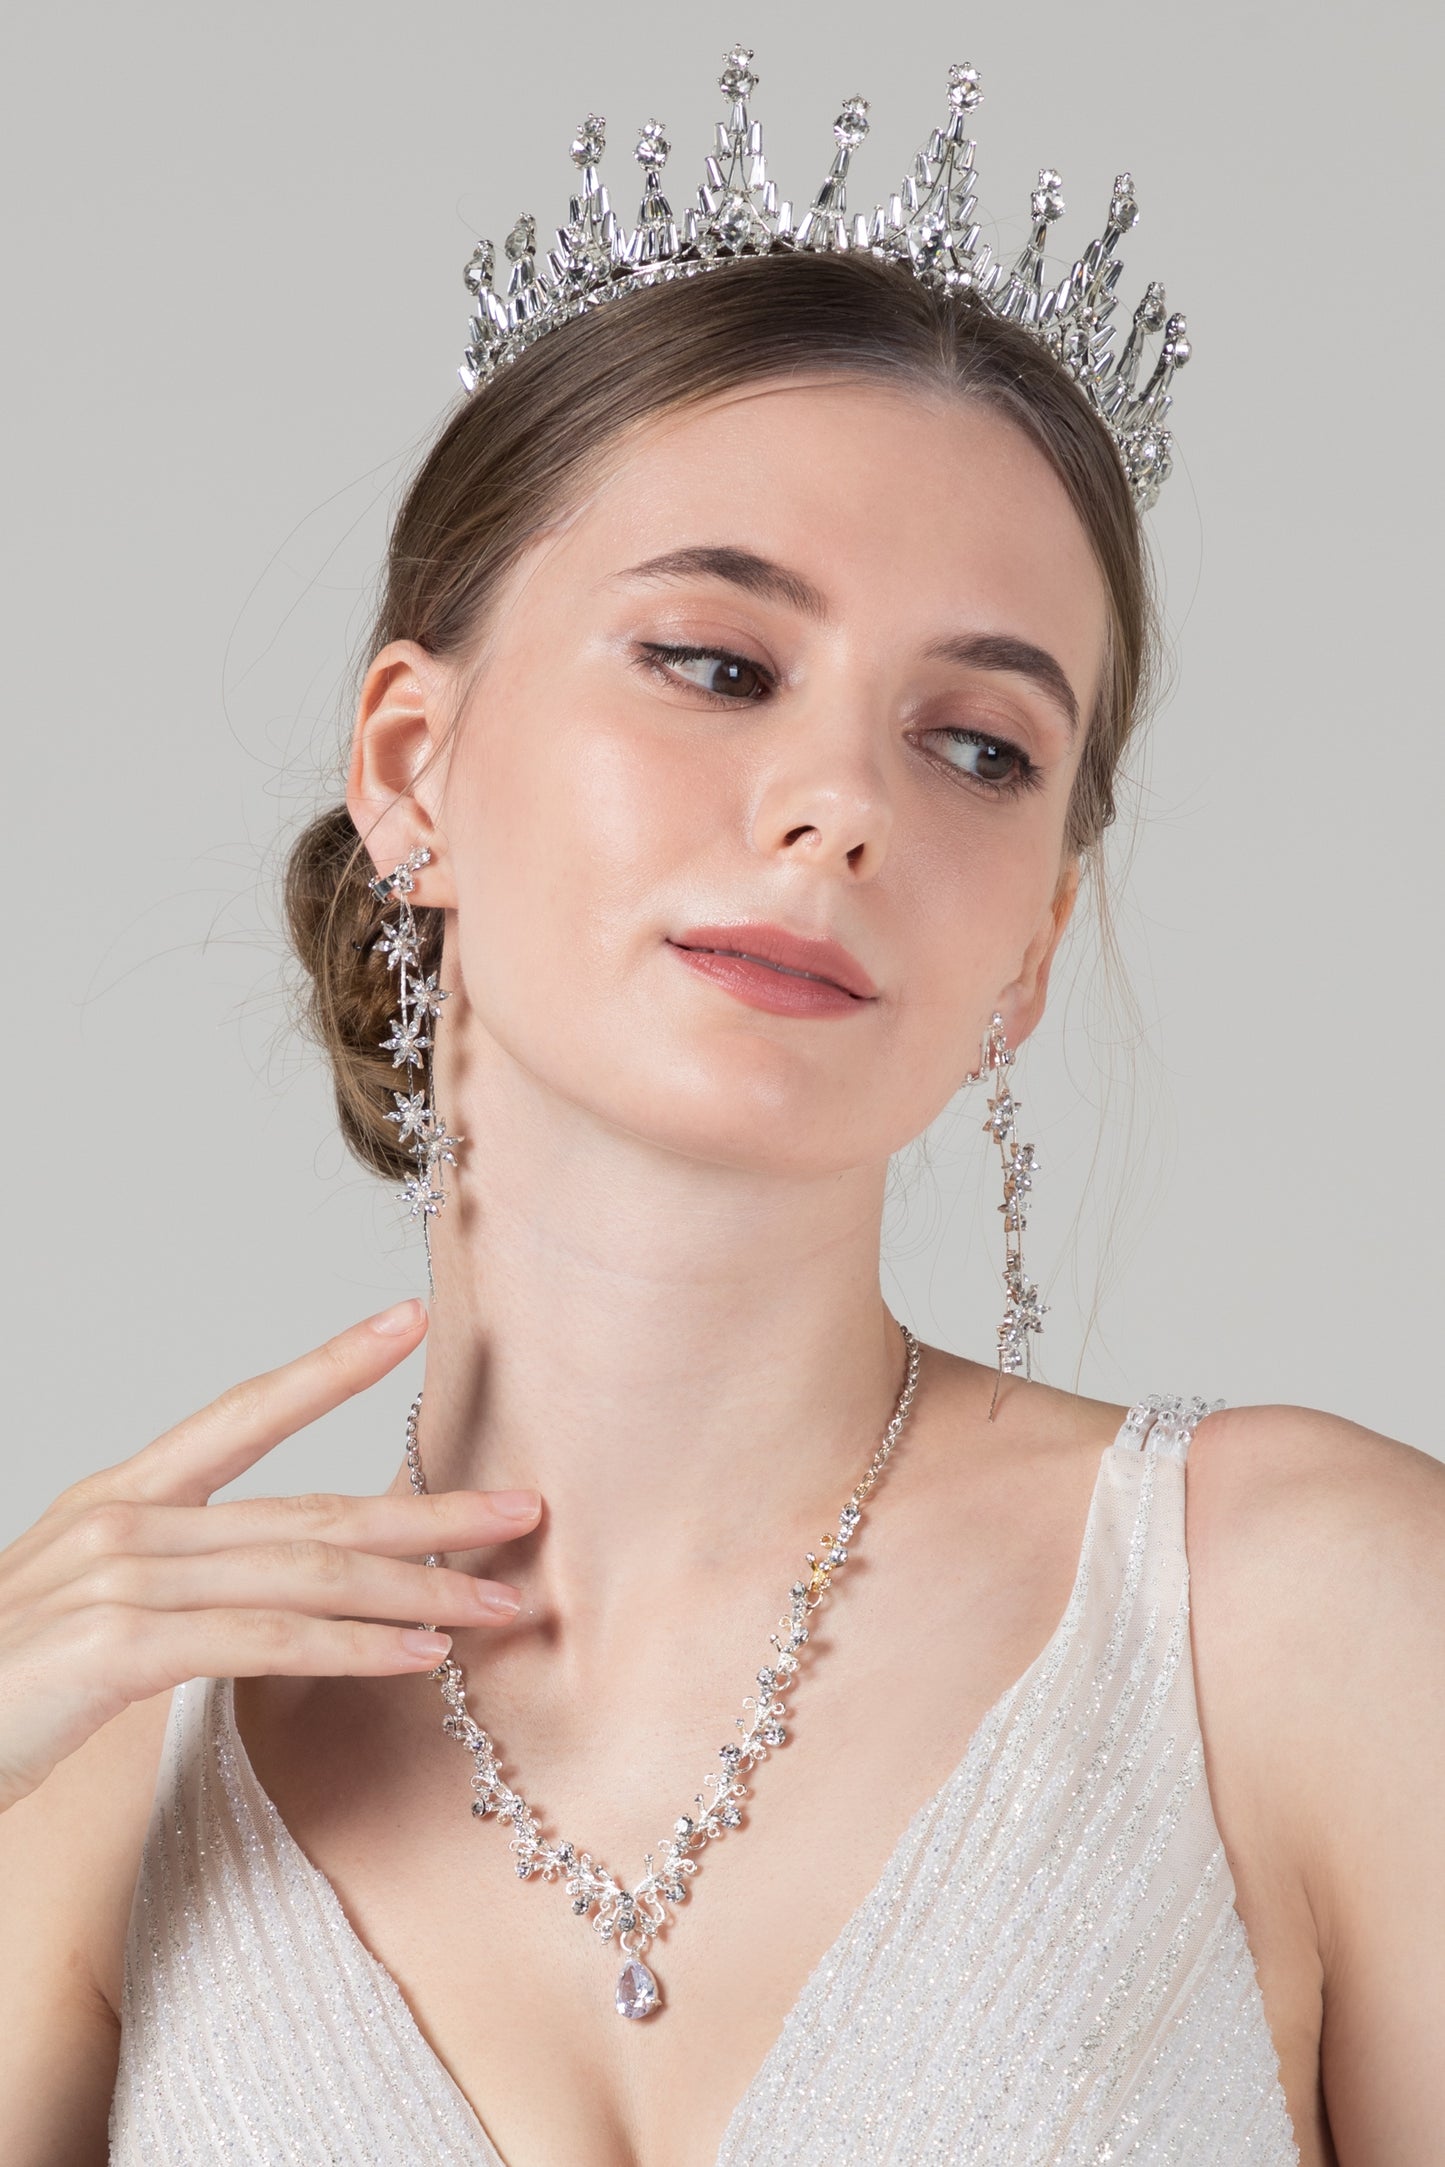 Crystals Tiara Necklace Earrings Jewelry CY0067